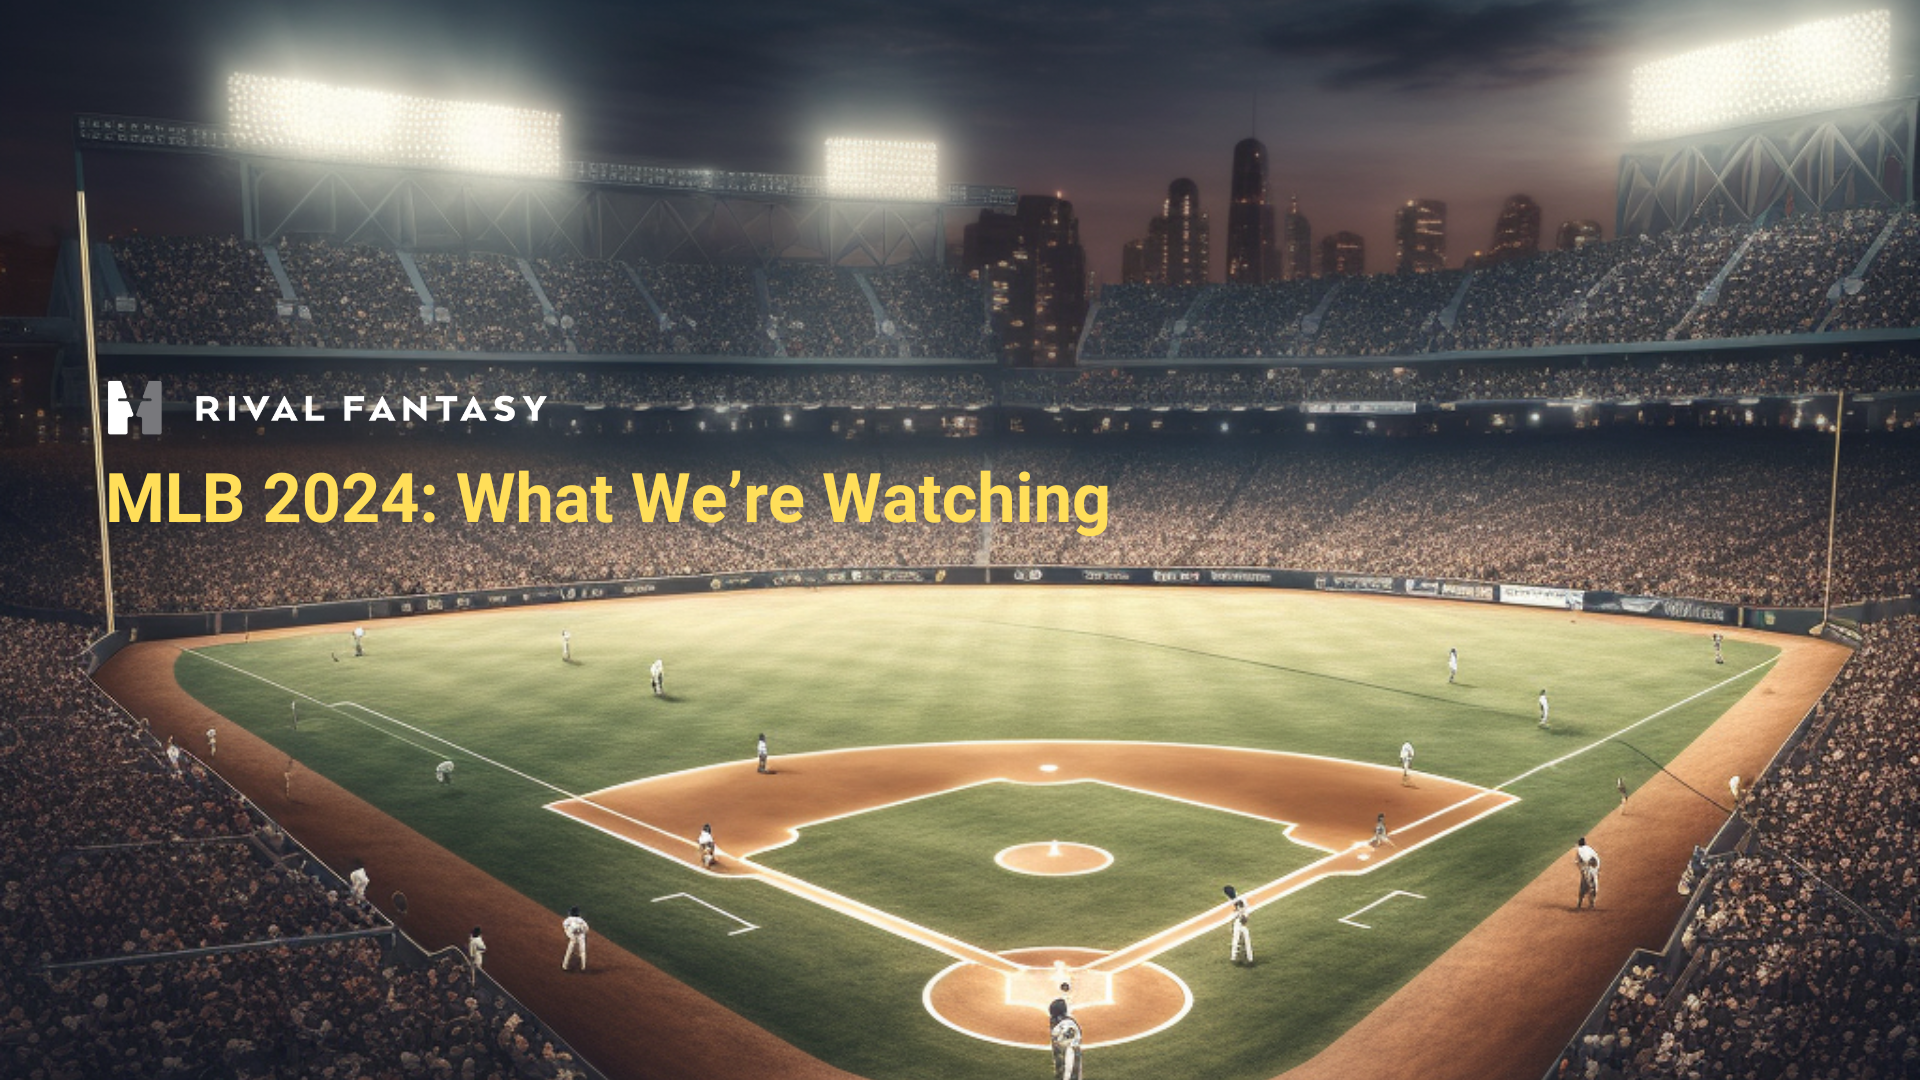 What we're watching in MLB 2024